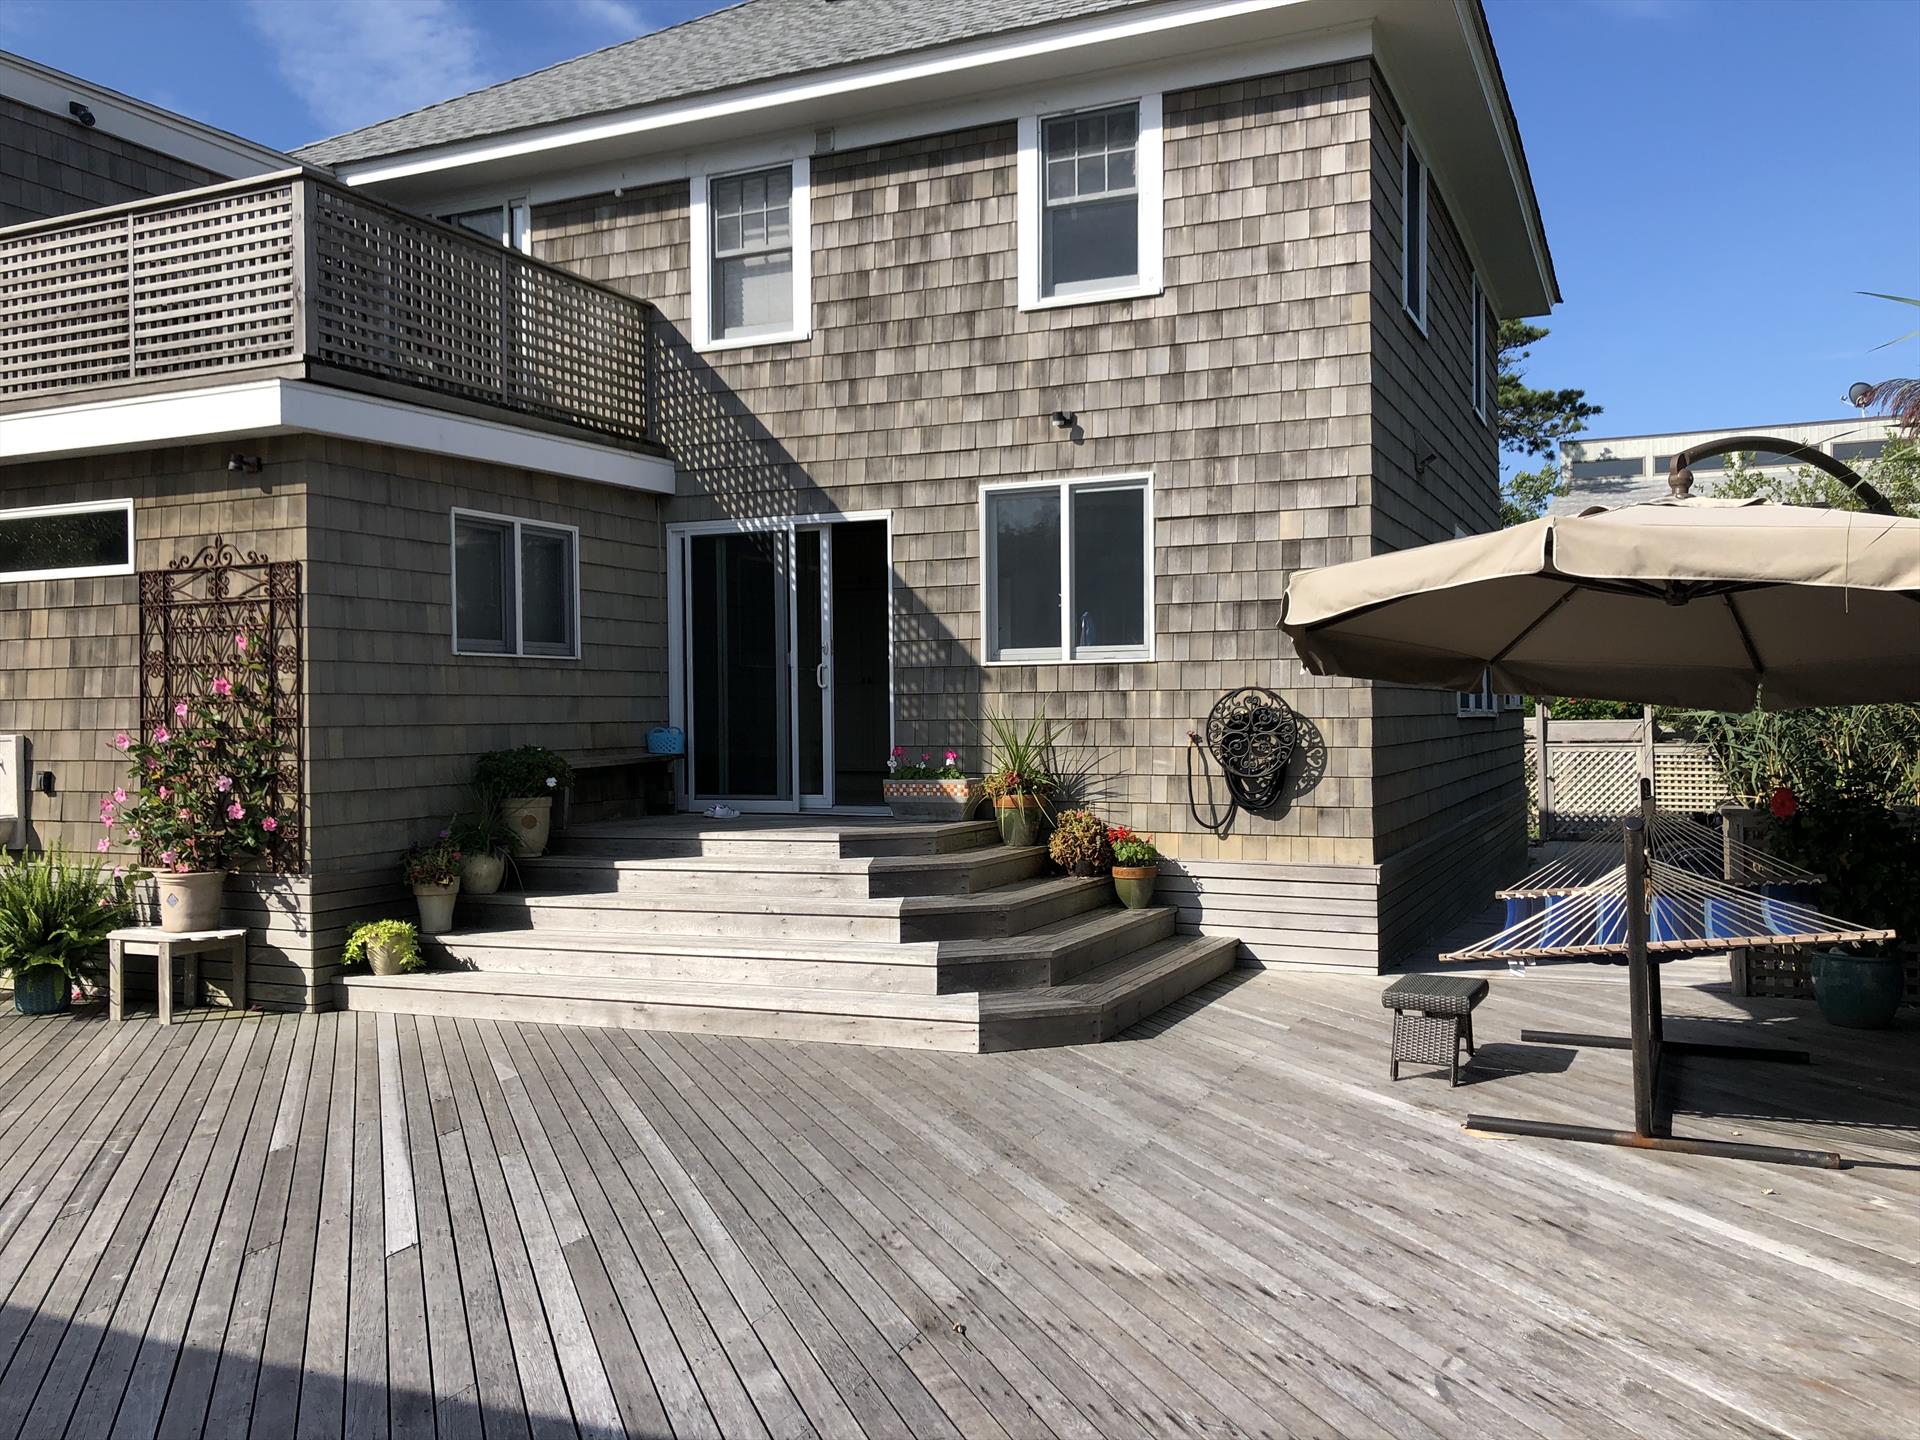 This home features 5 bedrooms and 3 bathrooms. Located on Crescent Ave in Seaview makes it the perfect location close enough to Ocean Beach and the restaurants but still with the Seaview amenities. Huge deck with plenty of sun and shade. Relax after a long day at the beach in the hot tub! 